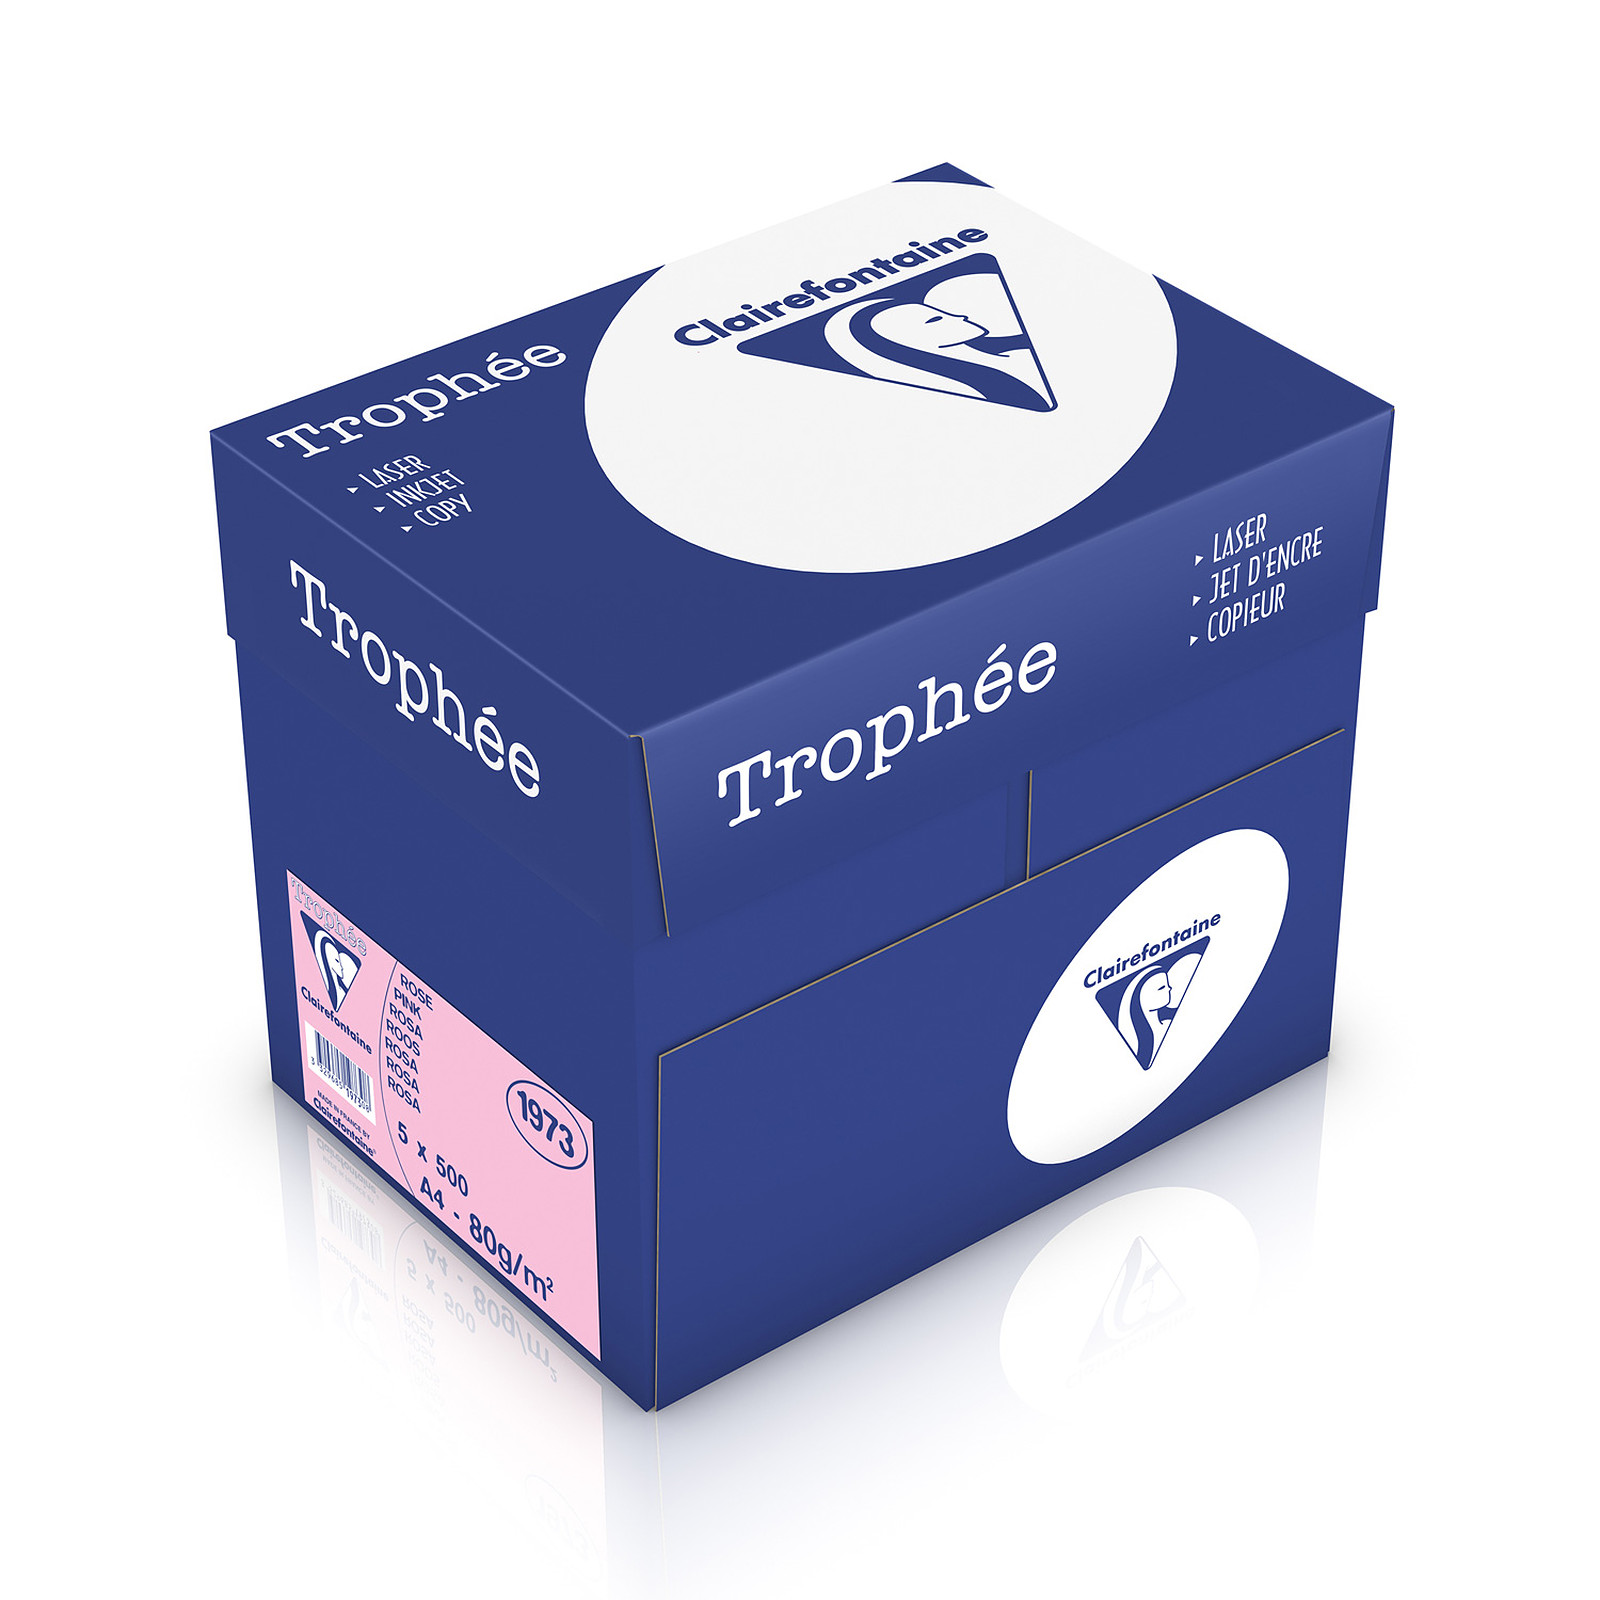 Clairefontaine Trophee A4 Ramette 500 feuilles 80g Rose X5 - Ramette de papier Clairefontaine